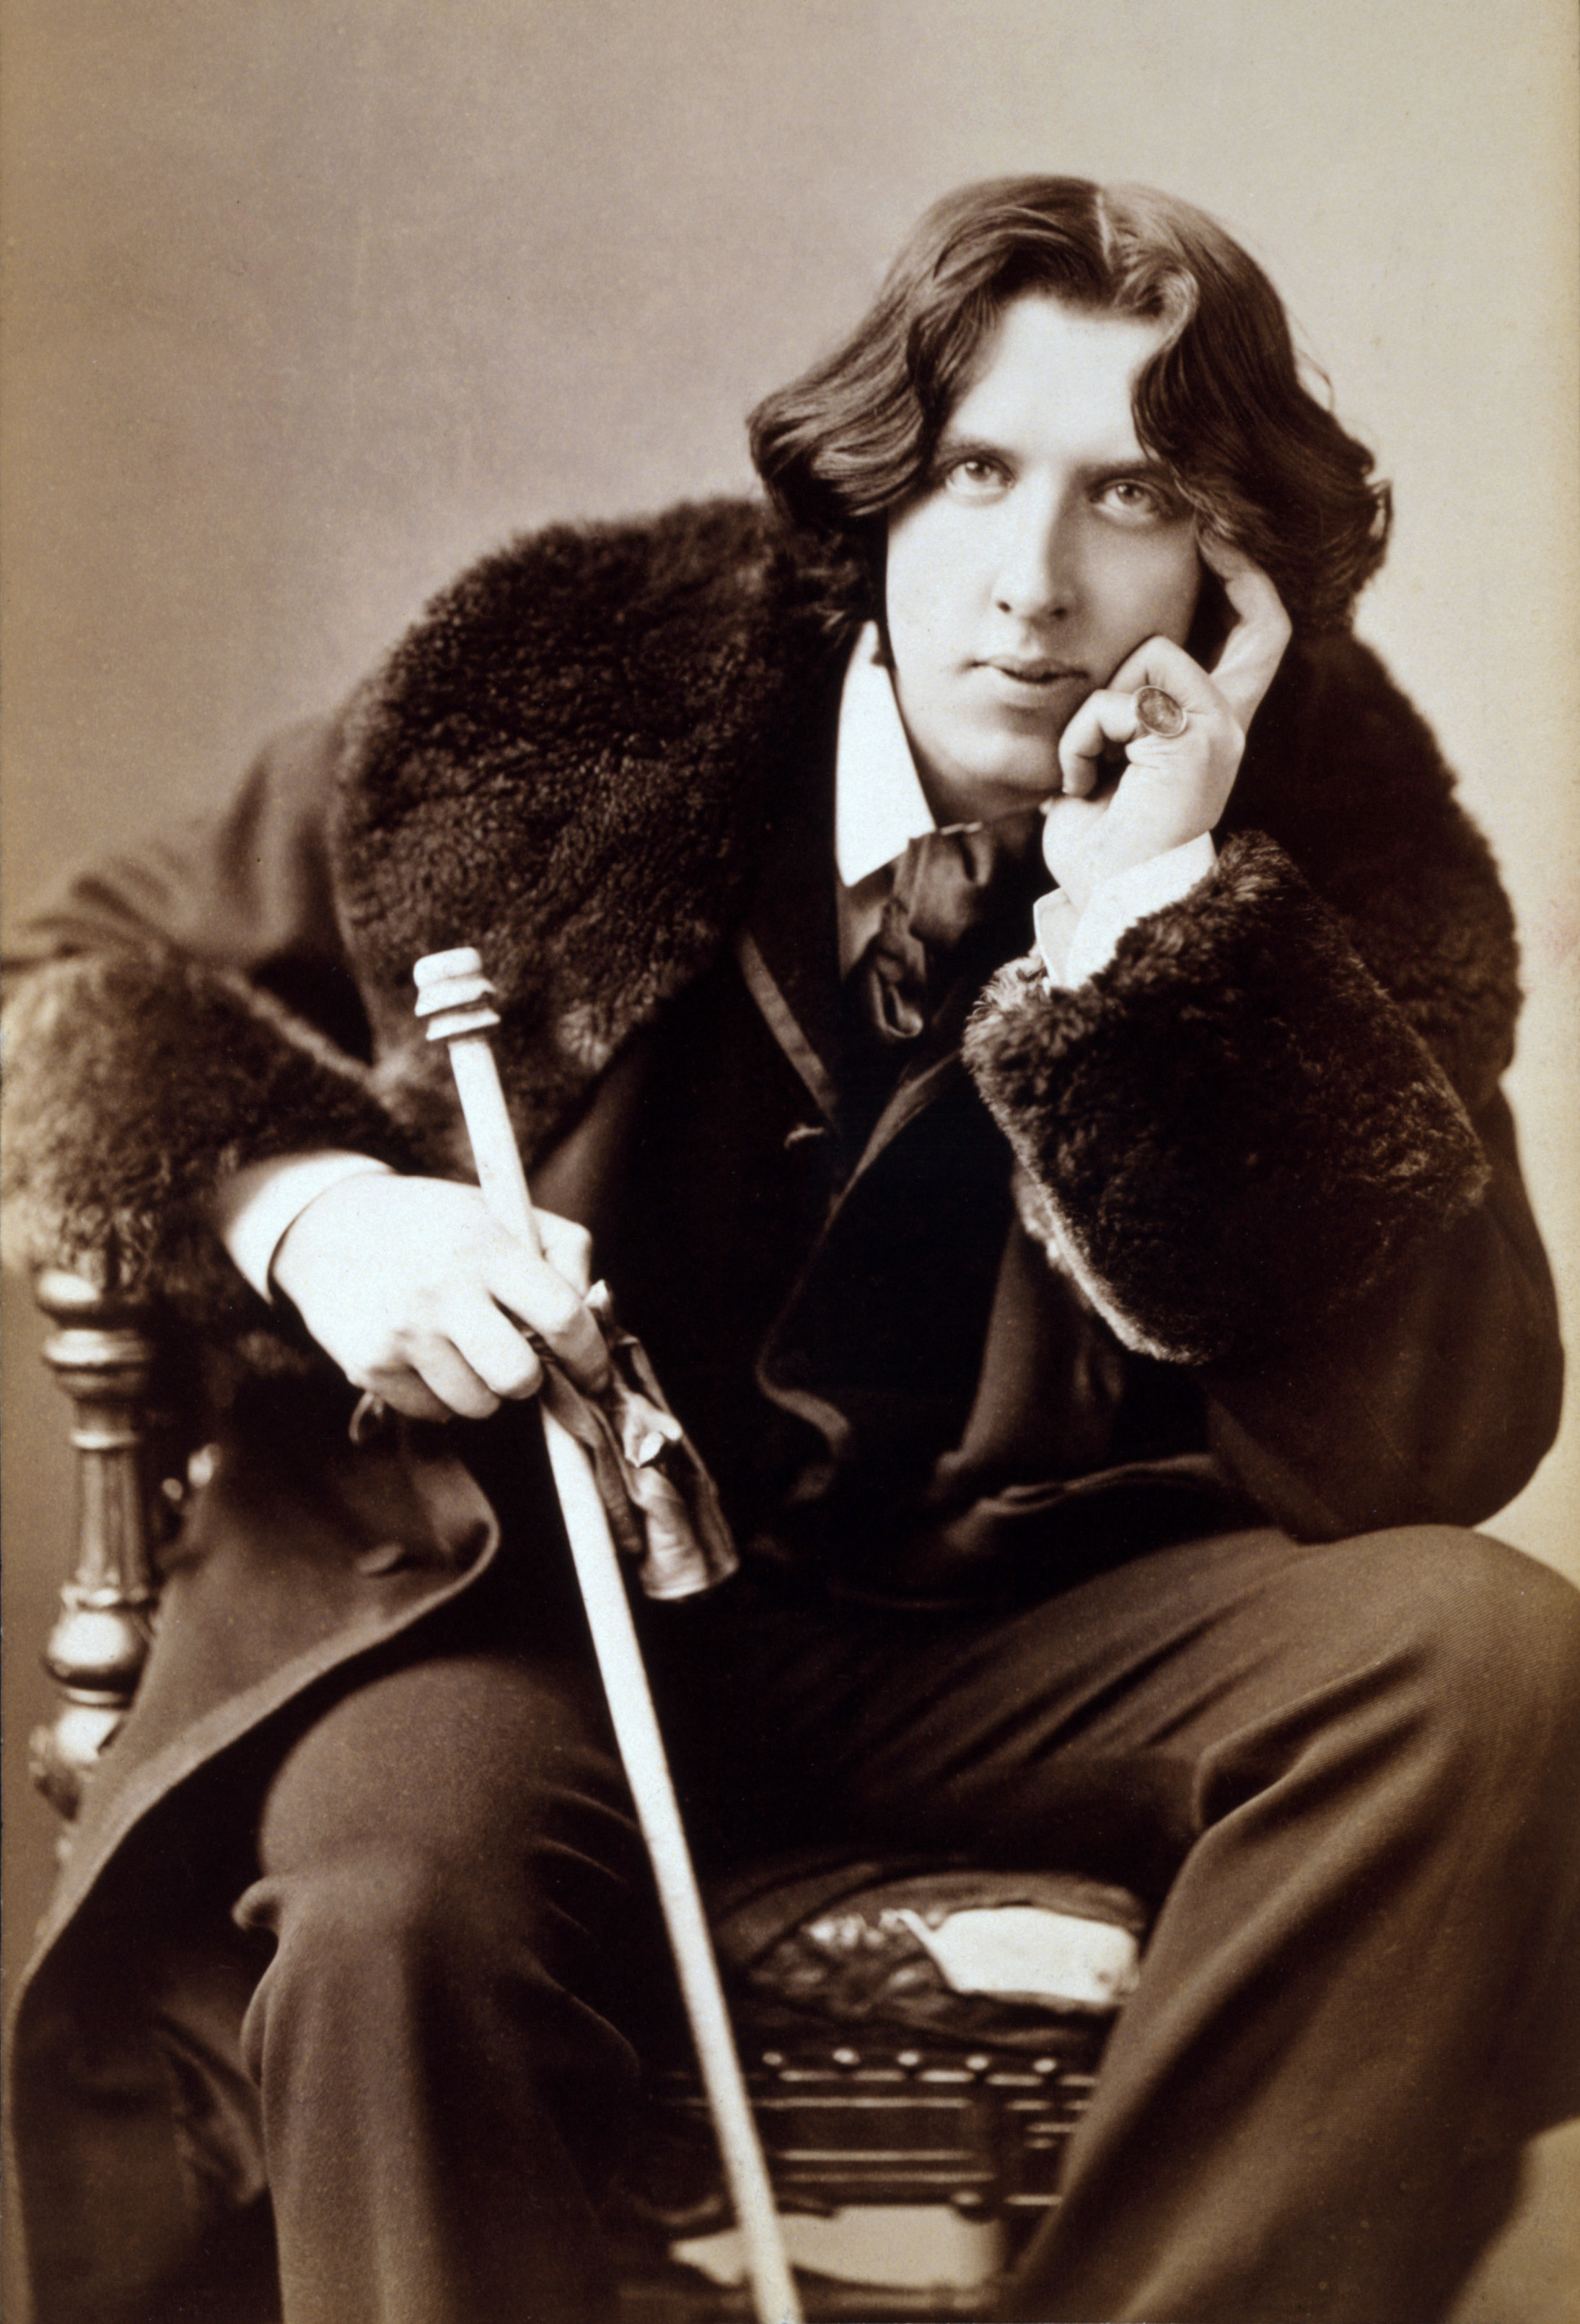 Sepia toned photograph of a young Oscar Wilde in a fur collared coat, holding a cane. He is sitting and his elbow is on his thigh and he cups his face with his hand. 